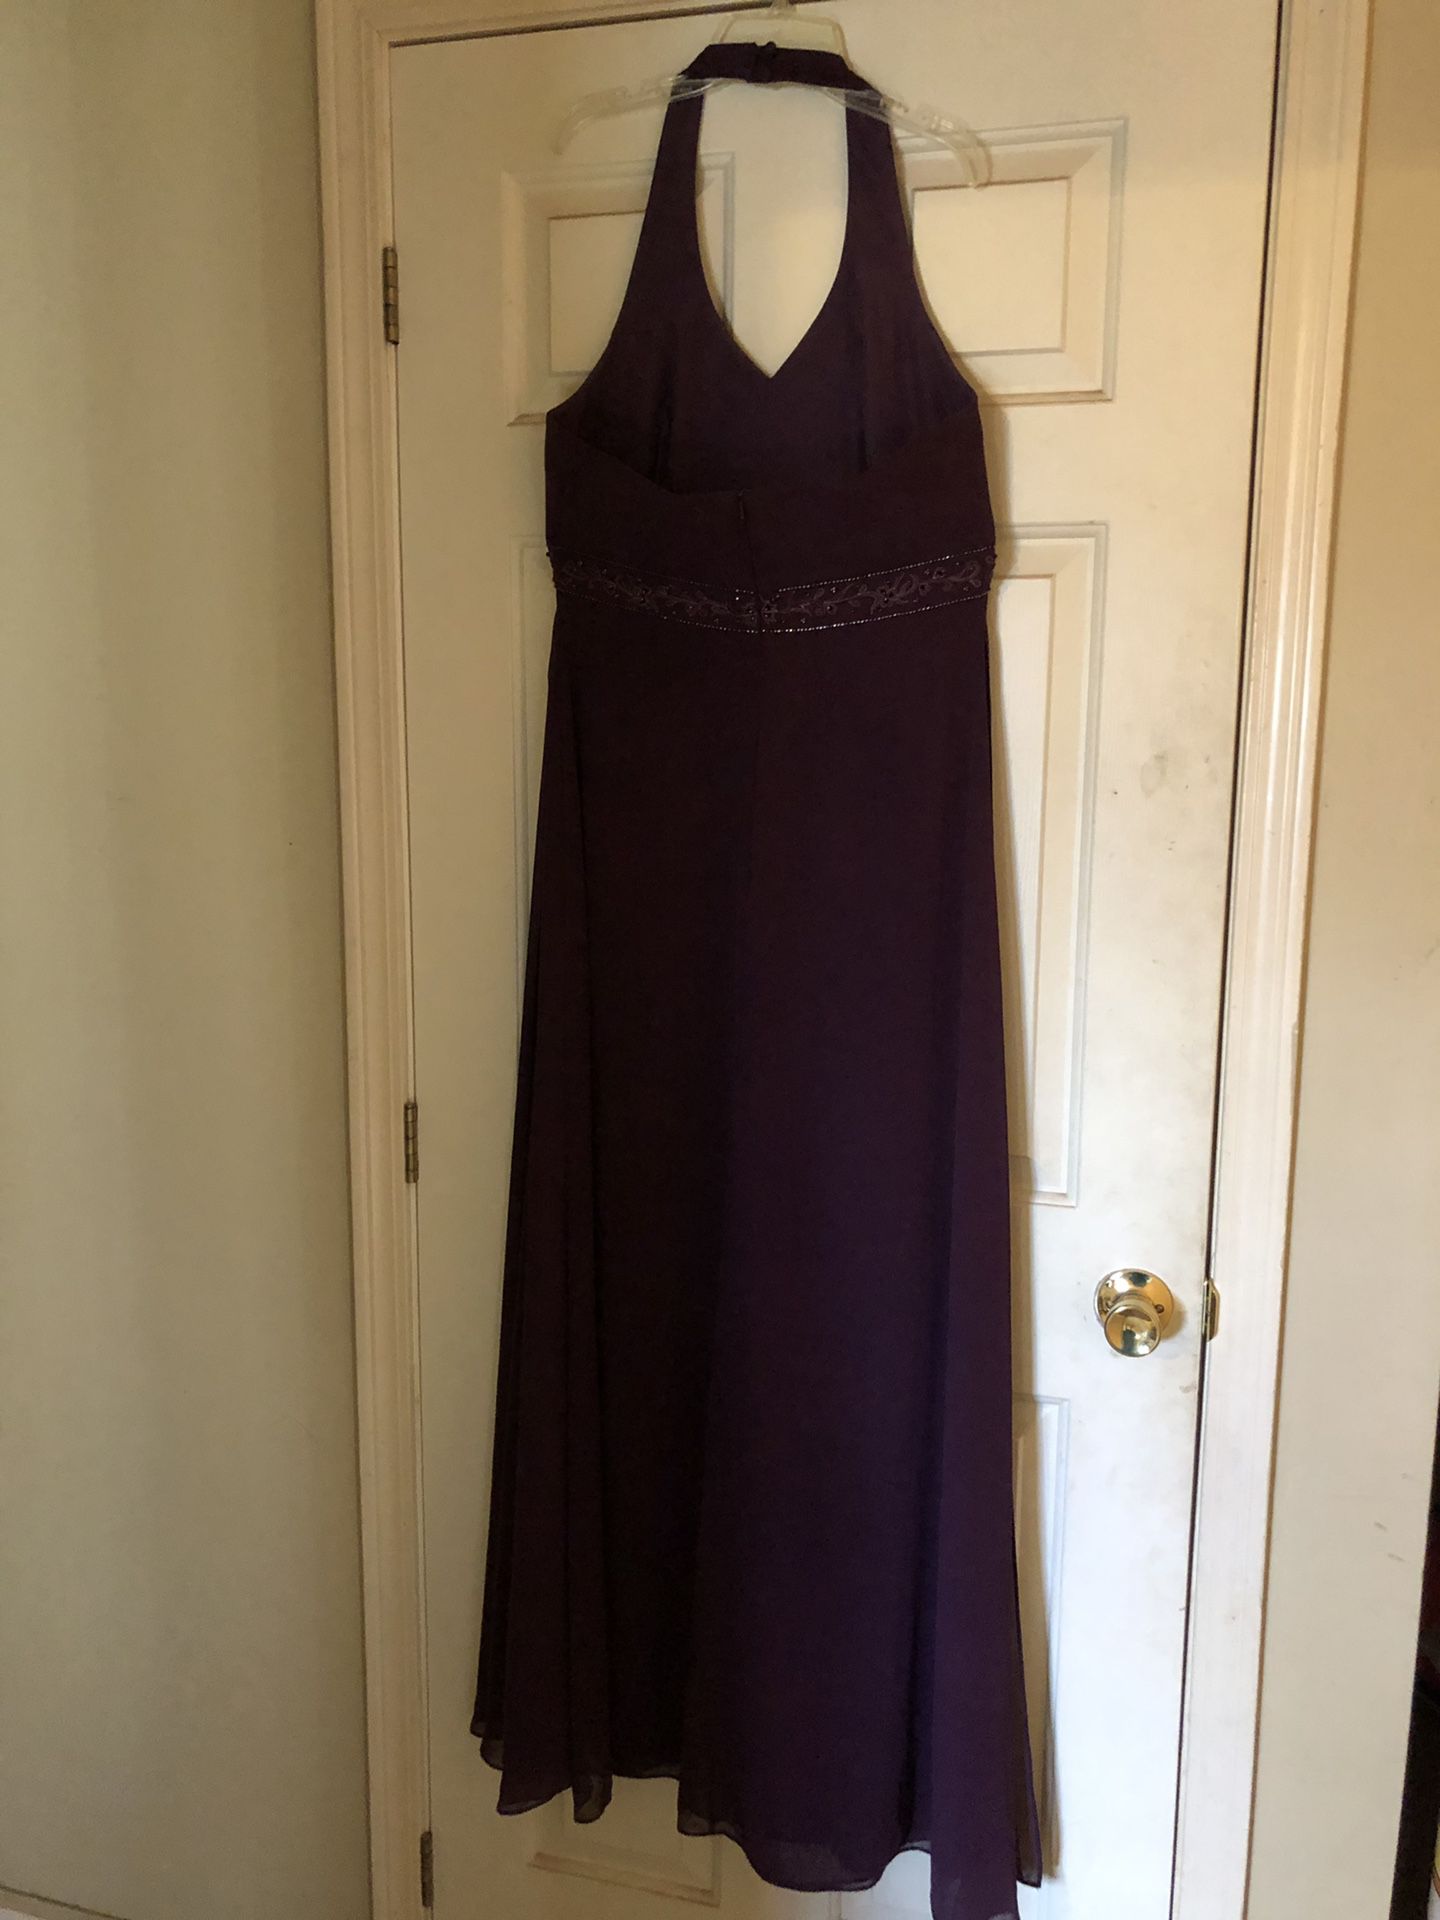 Amethyst (or purple) Prom or Event Dress